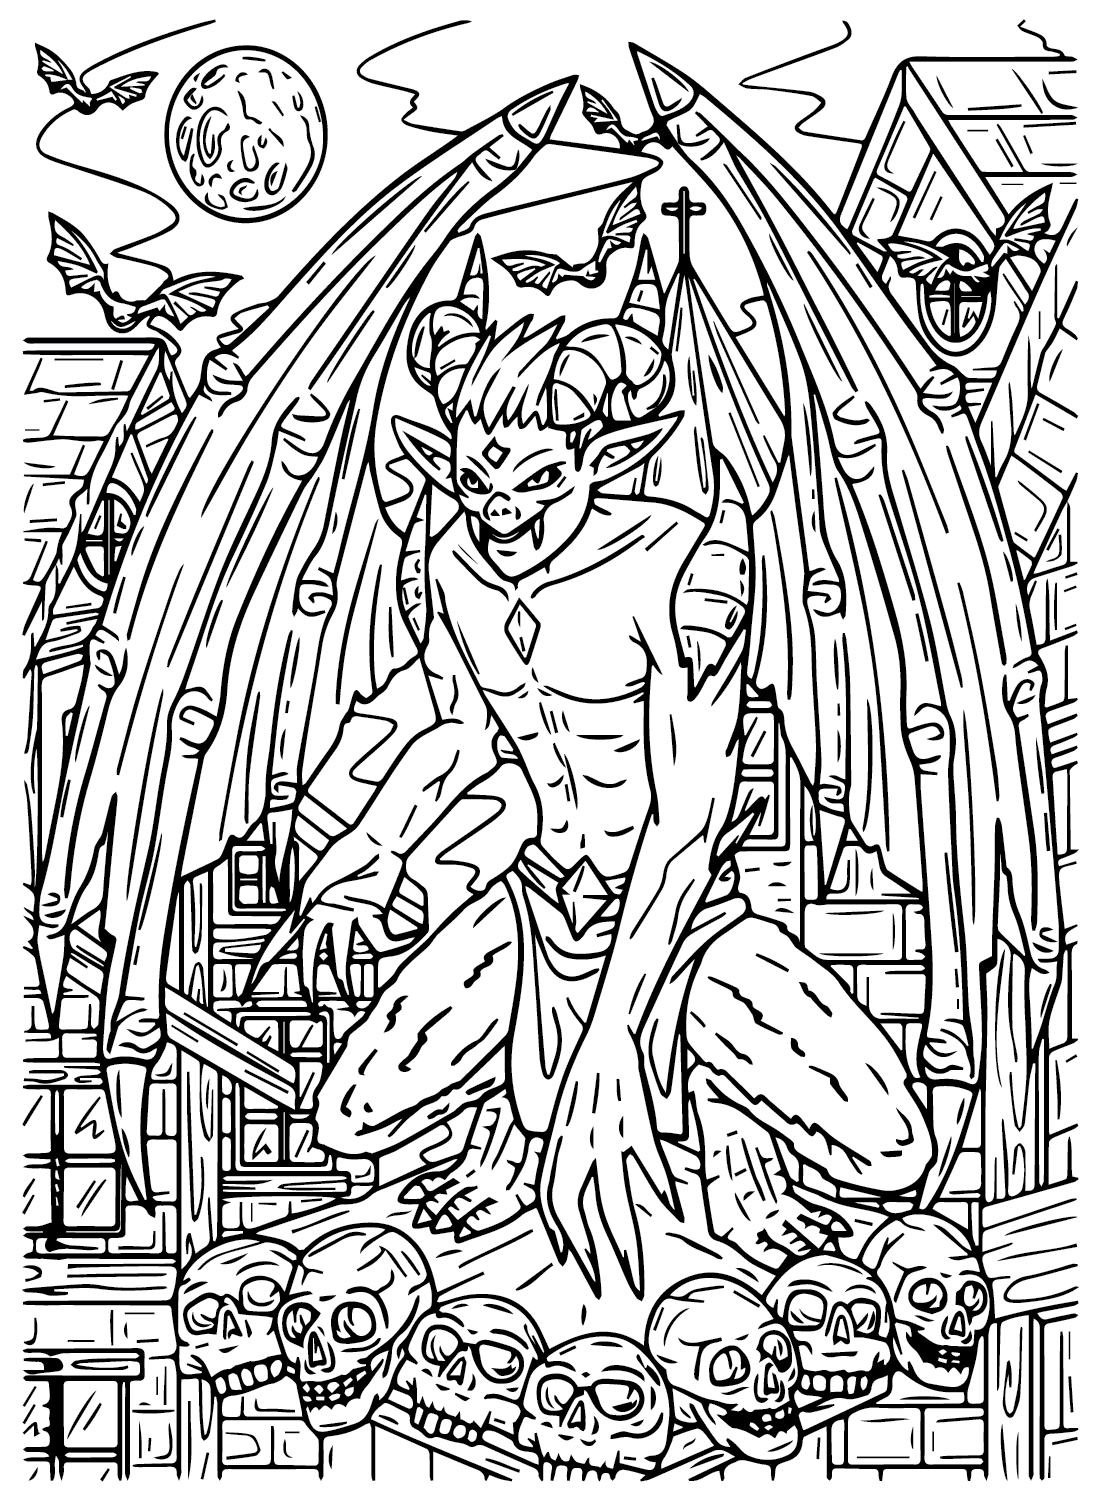 Scary Coloring Pages for Halloween from Scary Halloween